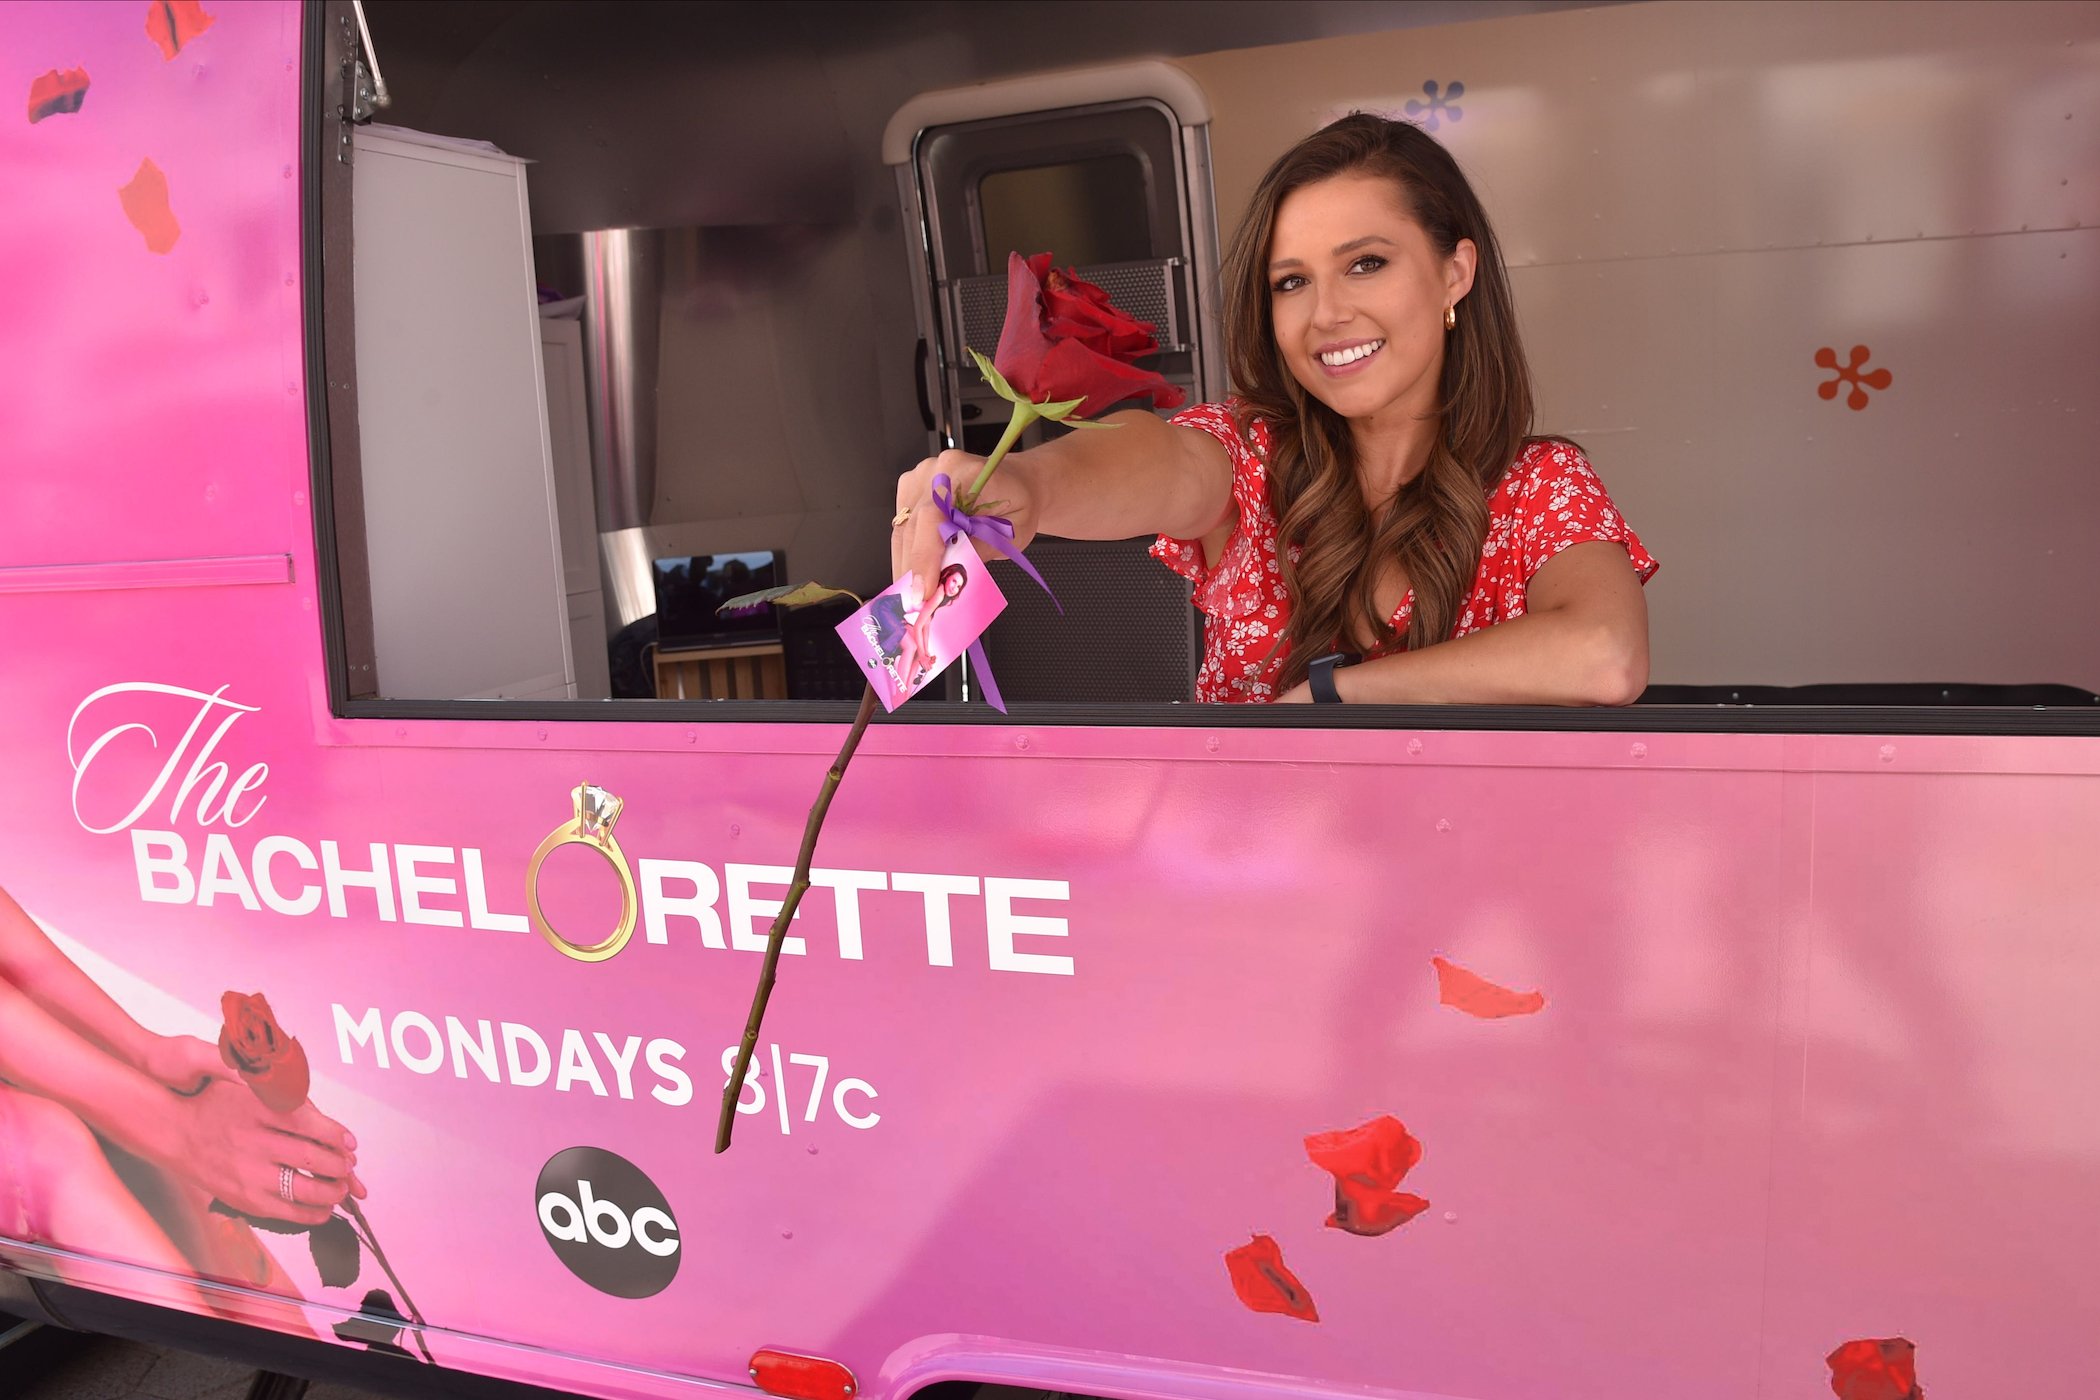 Katie Thurston from Matt James' season of 'The Bachelor' holding a rose while inside of a pink truck as the star of 'The Bachelorette'